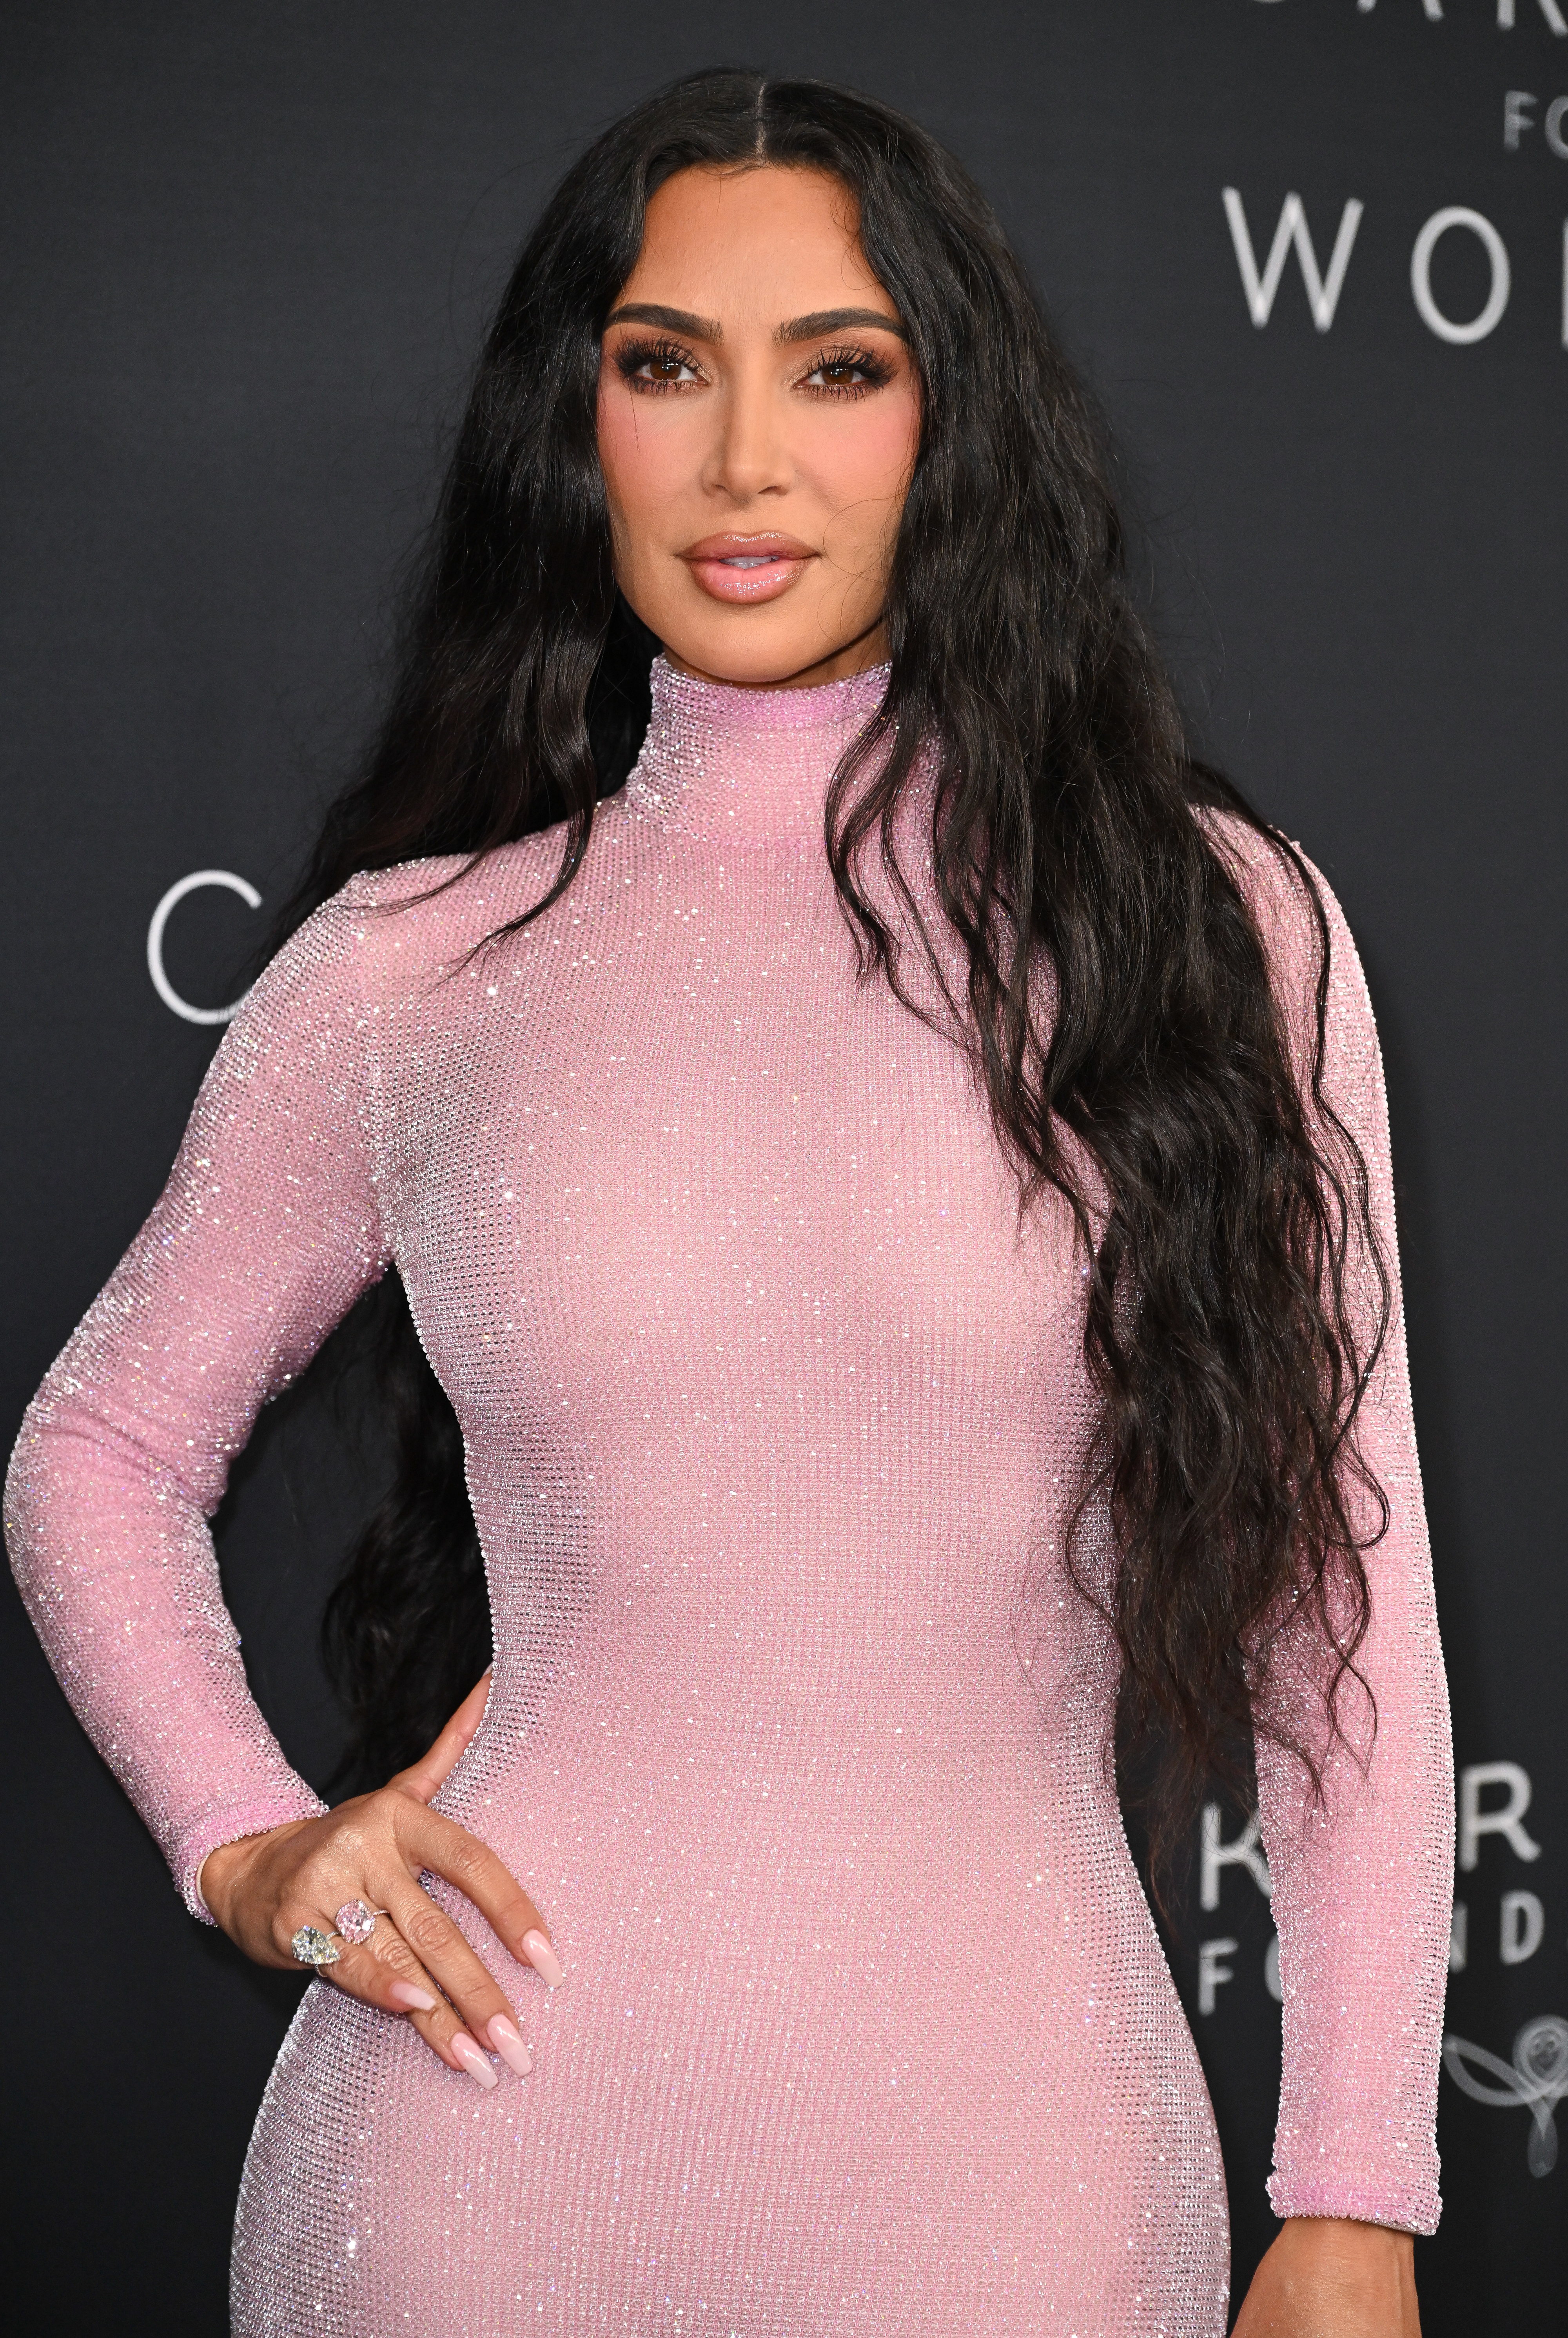 Close-up of Kim at the event